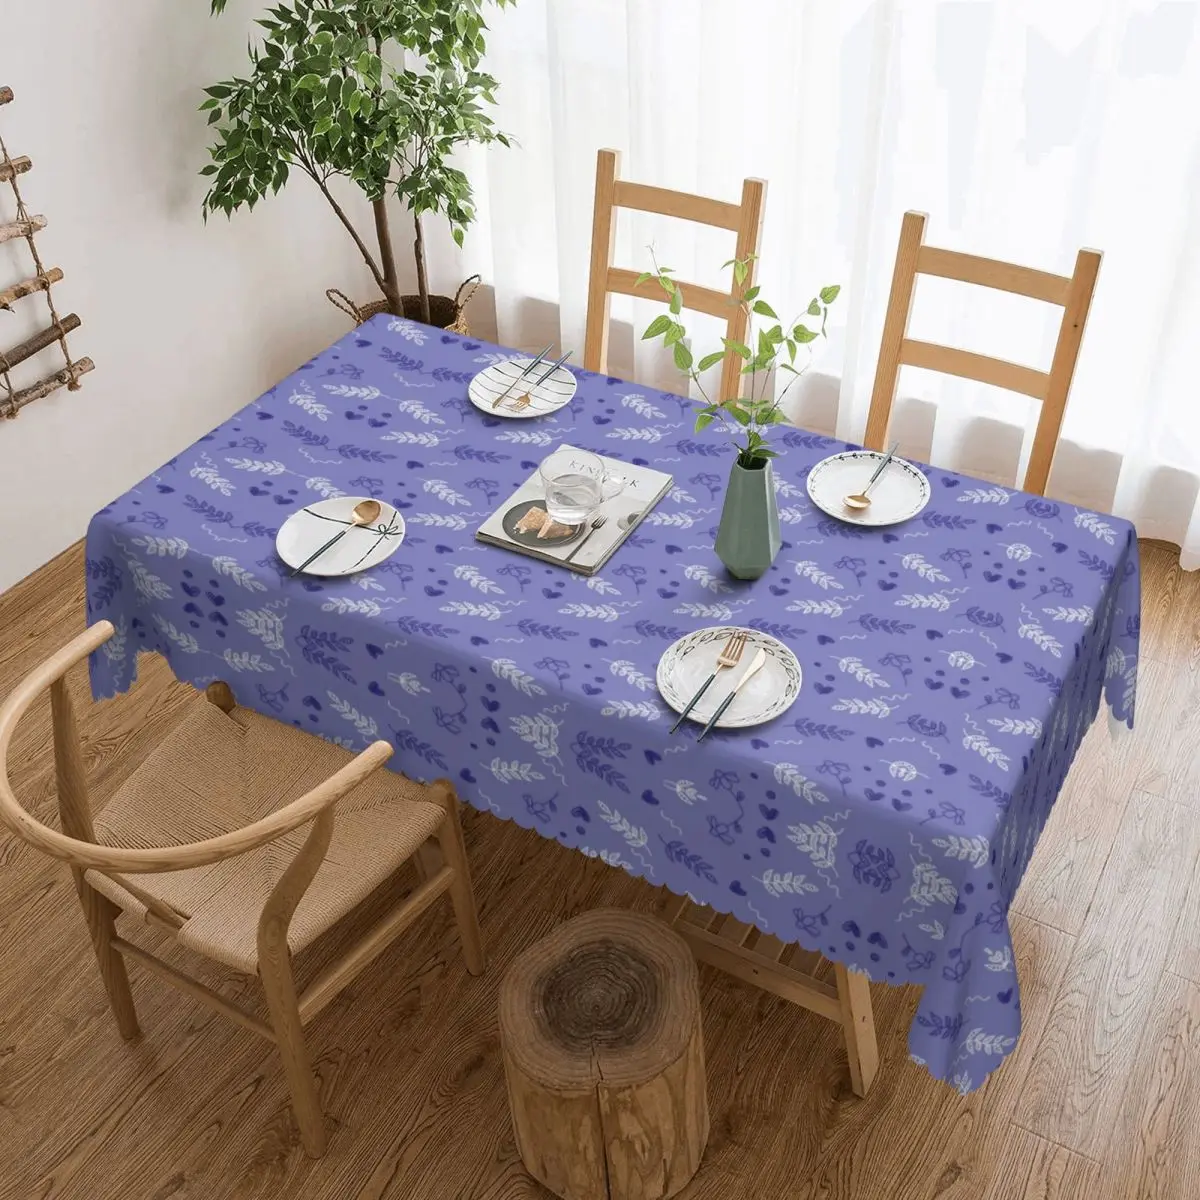 

Rectangular Waterproof Oil-Proof Lavender Wild Flowers Plant Tablecloth Table Covers 40"-44" Fit Floral Pattern Table Cloth